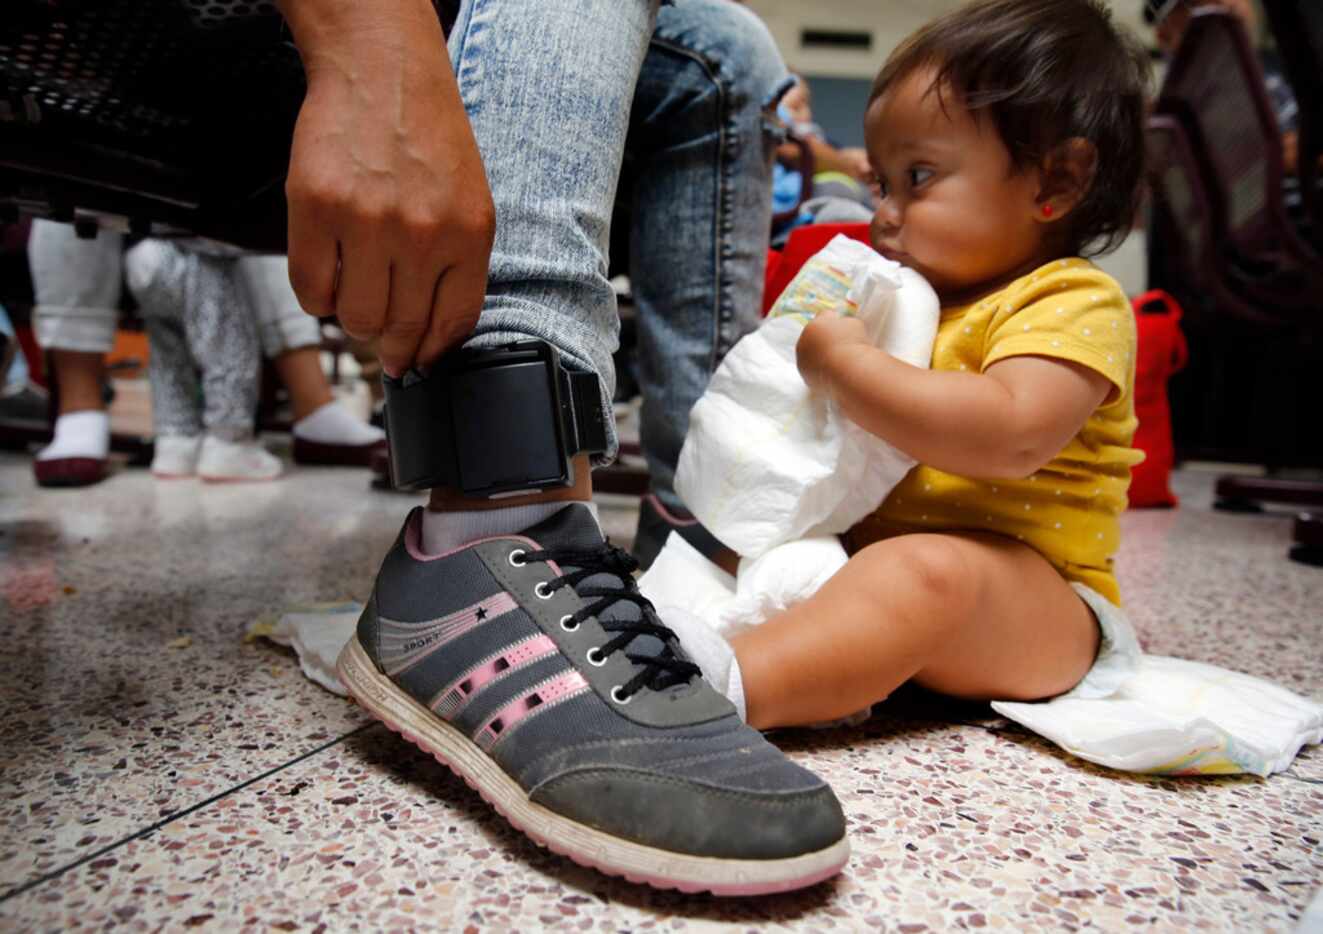 Damaris Gonzalez, 20, of Guatemala shows her ankle monitor, which was attached by Border...